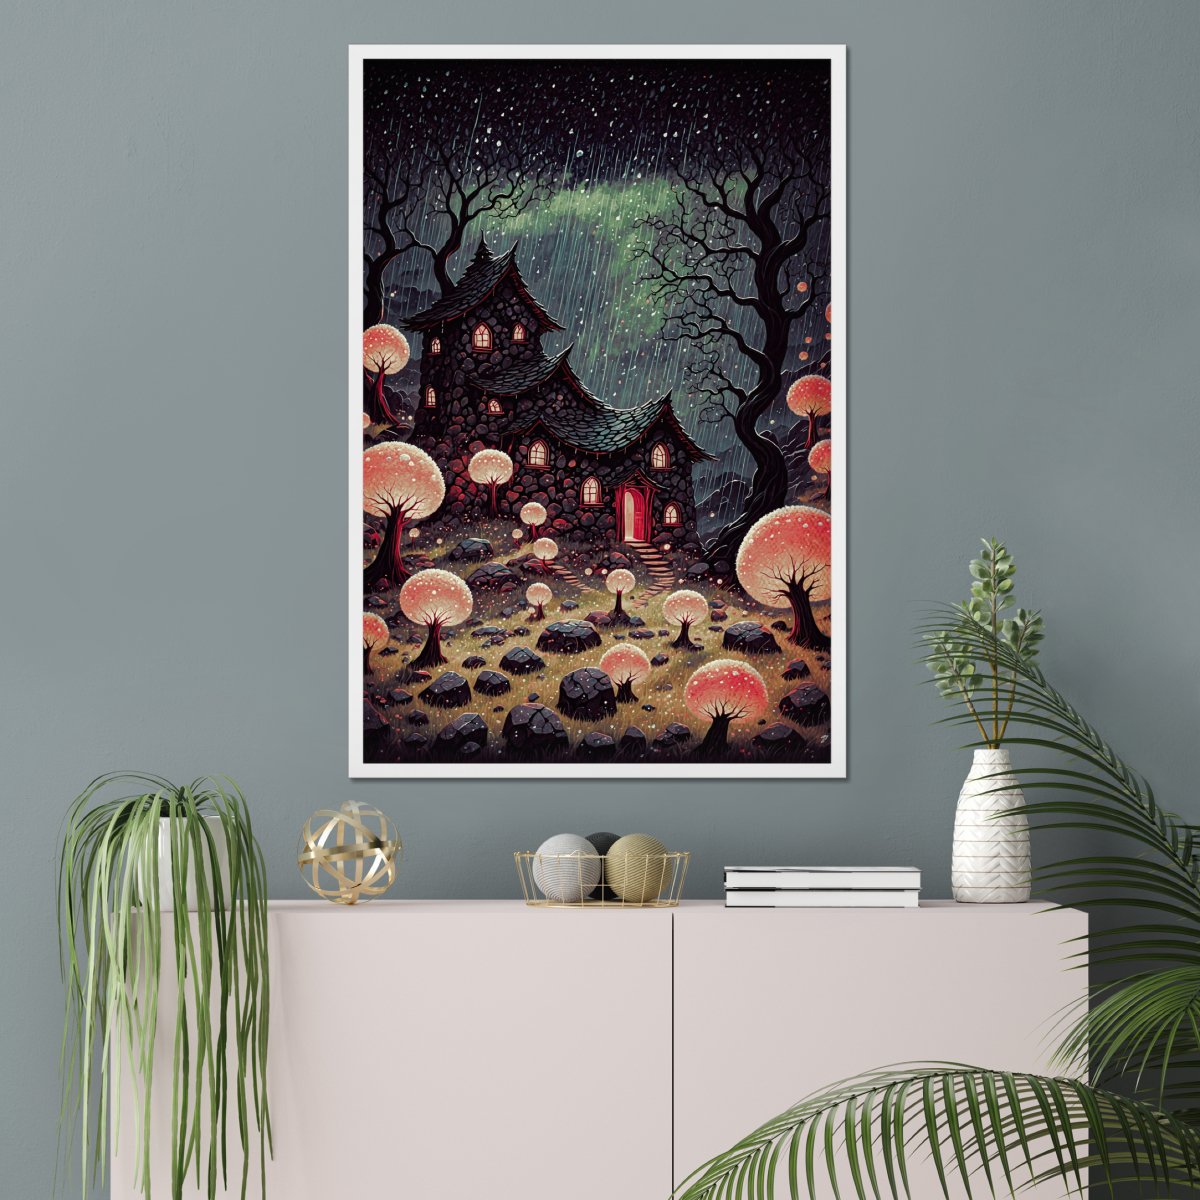 Popplers shine - Art print - Poster - Ever colorful